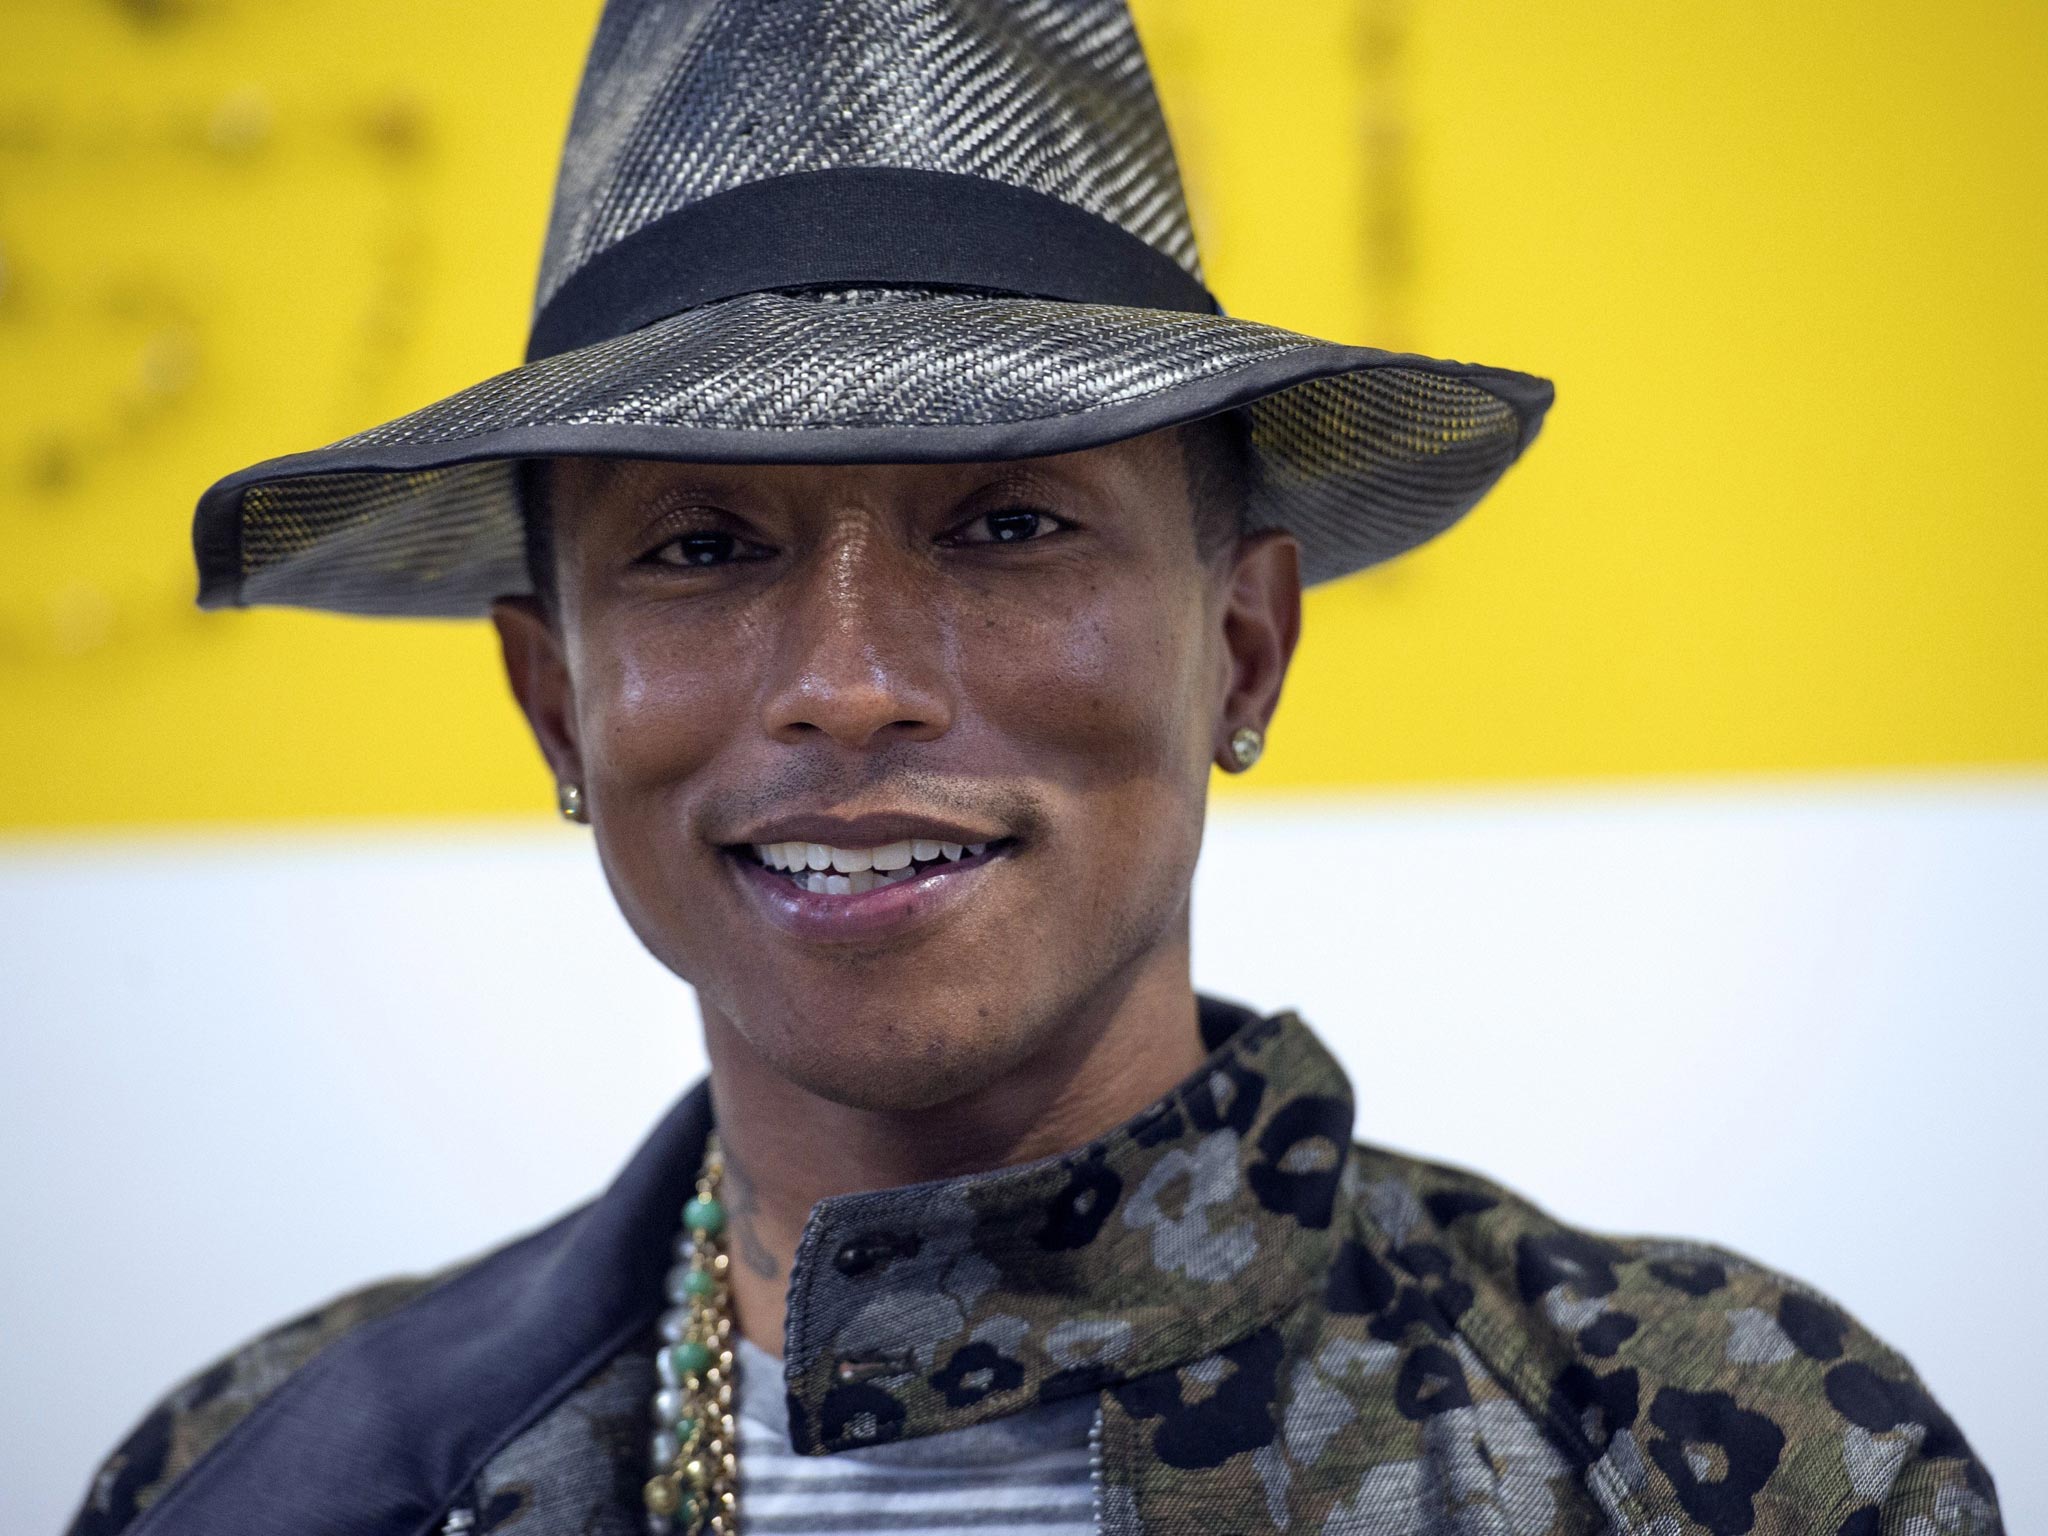 The Voice Judge Pharrell Williams's Hat Was Bought by a Friend